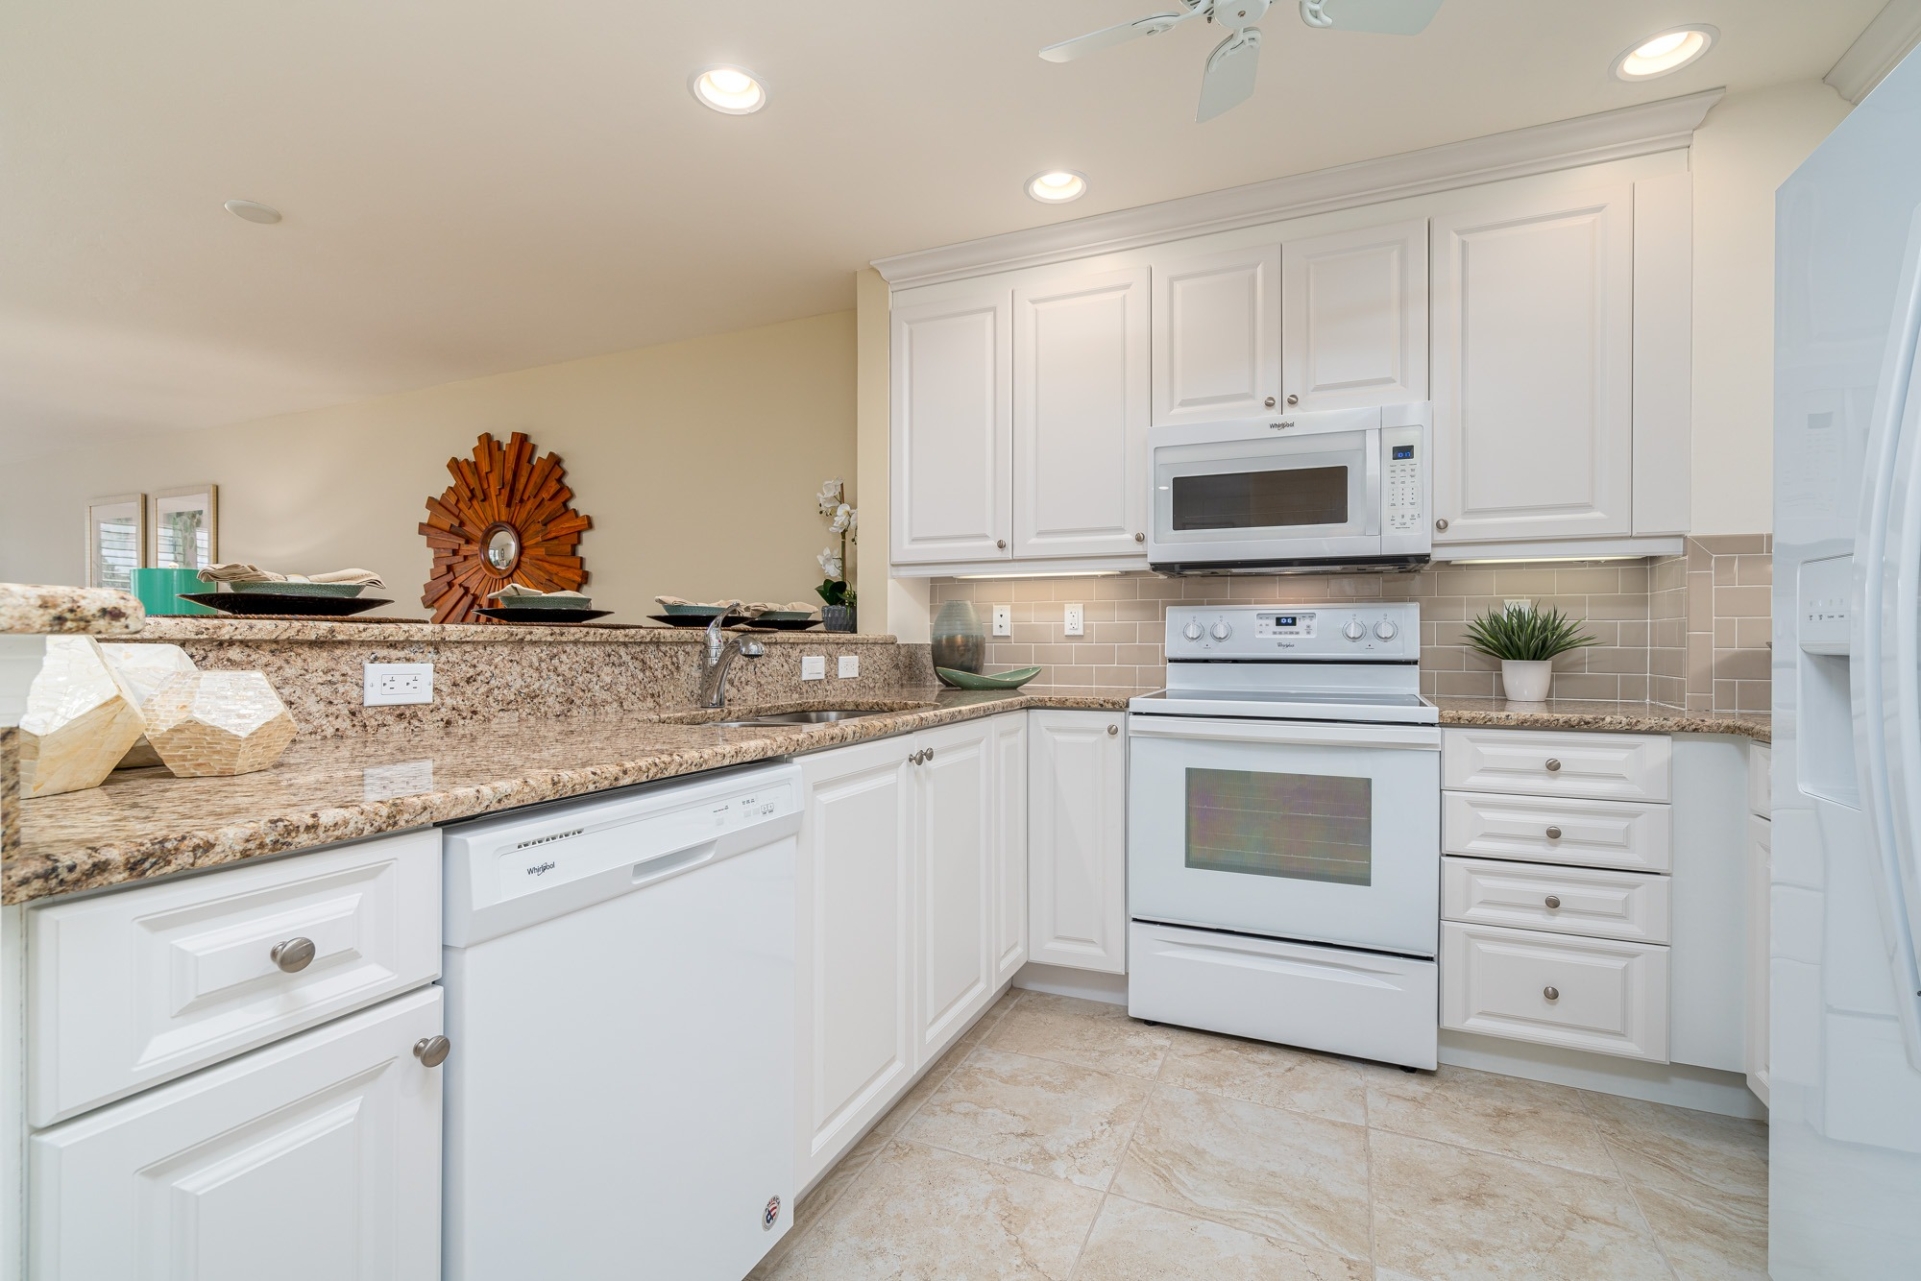 The kitchen at the Junonia Model Home at Shell Point Retirement Community